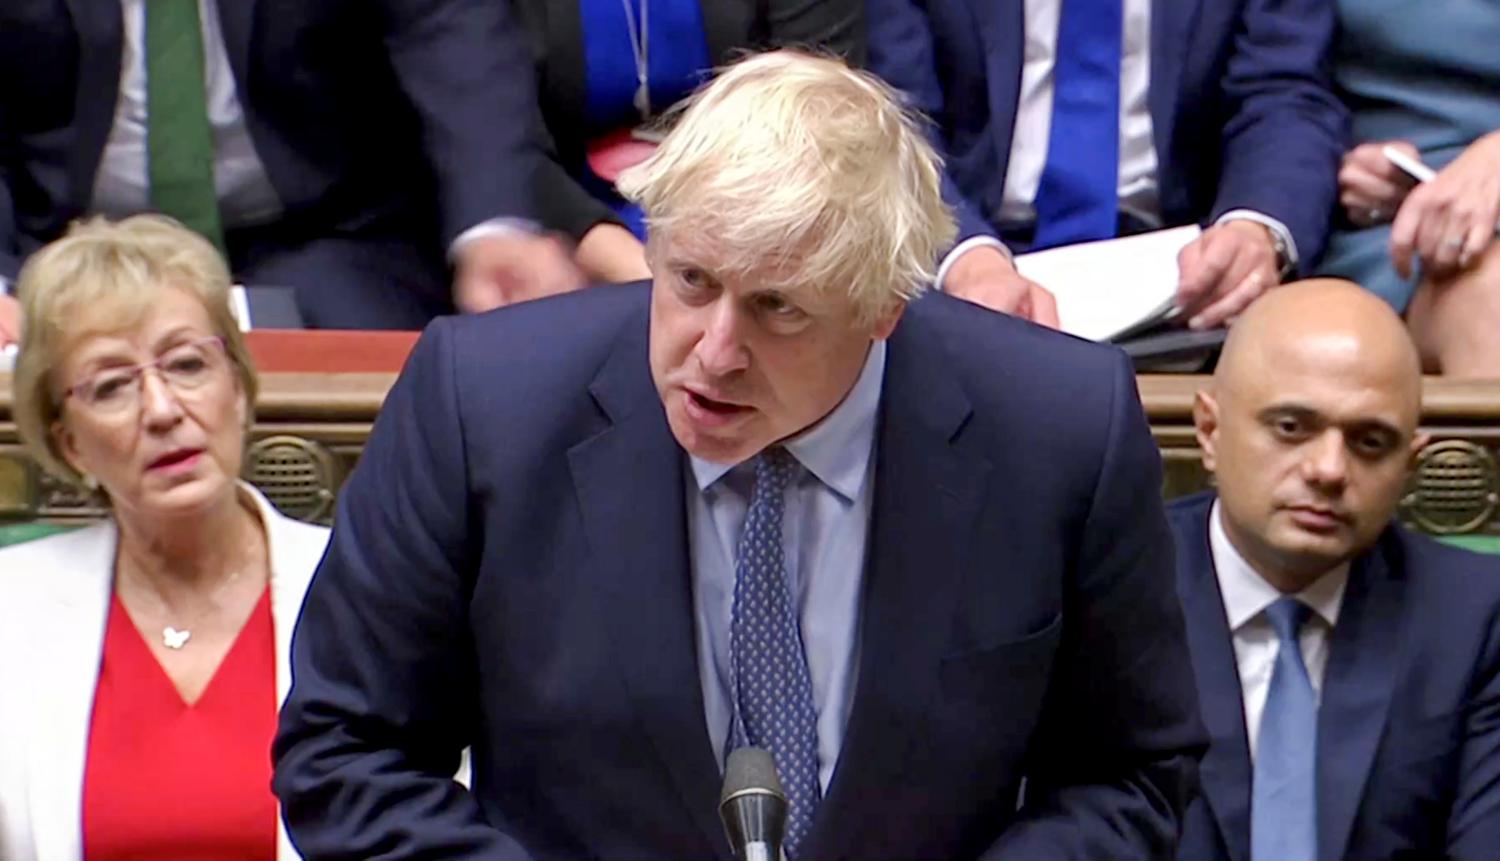 Britain's Prime Minister Boris Johnson speaks at the parliament, which reconvenes after the UK Supreme Court ruled that his suspension of the parliament was unlawful, in London, Britain, September 25, 2019, in this screen grab taken from video. Parliament TV via REUTERS - RC1DCFCF69D0